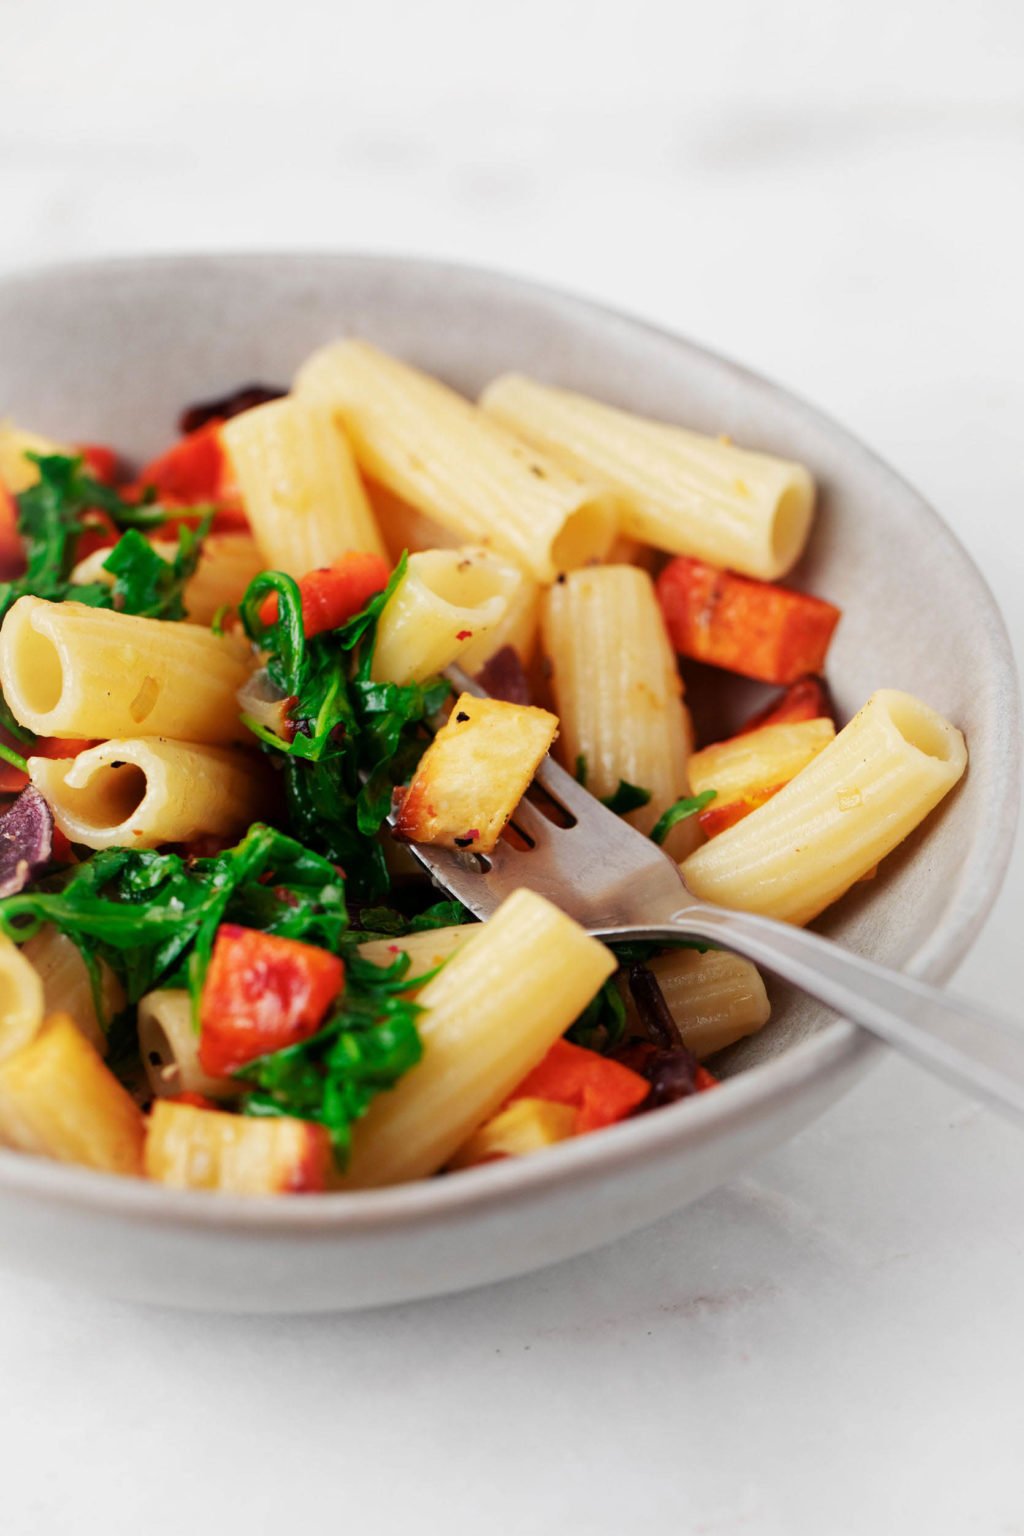 A gray ceramic bowl is filled with a balsamic roasted vegetable pasta. There's a fork piercing a piece of the pasta.